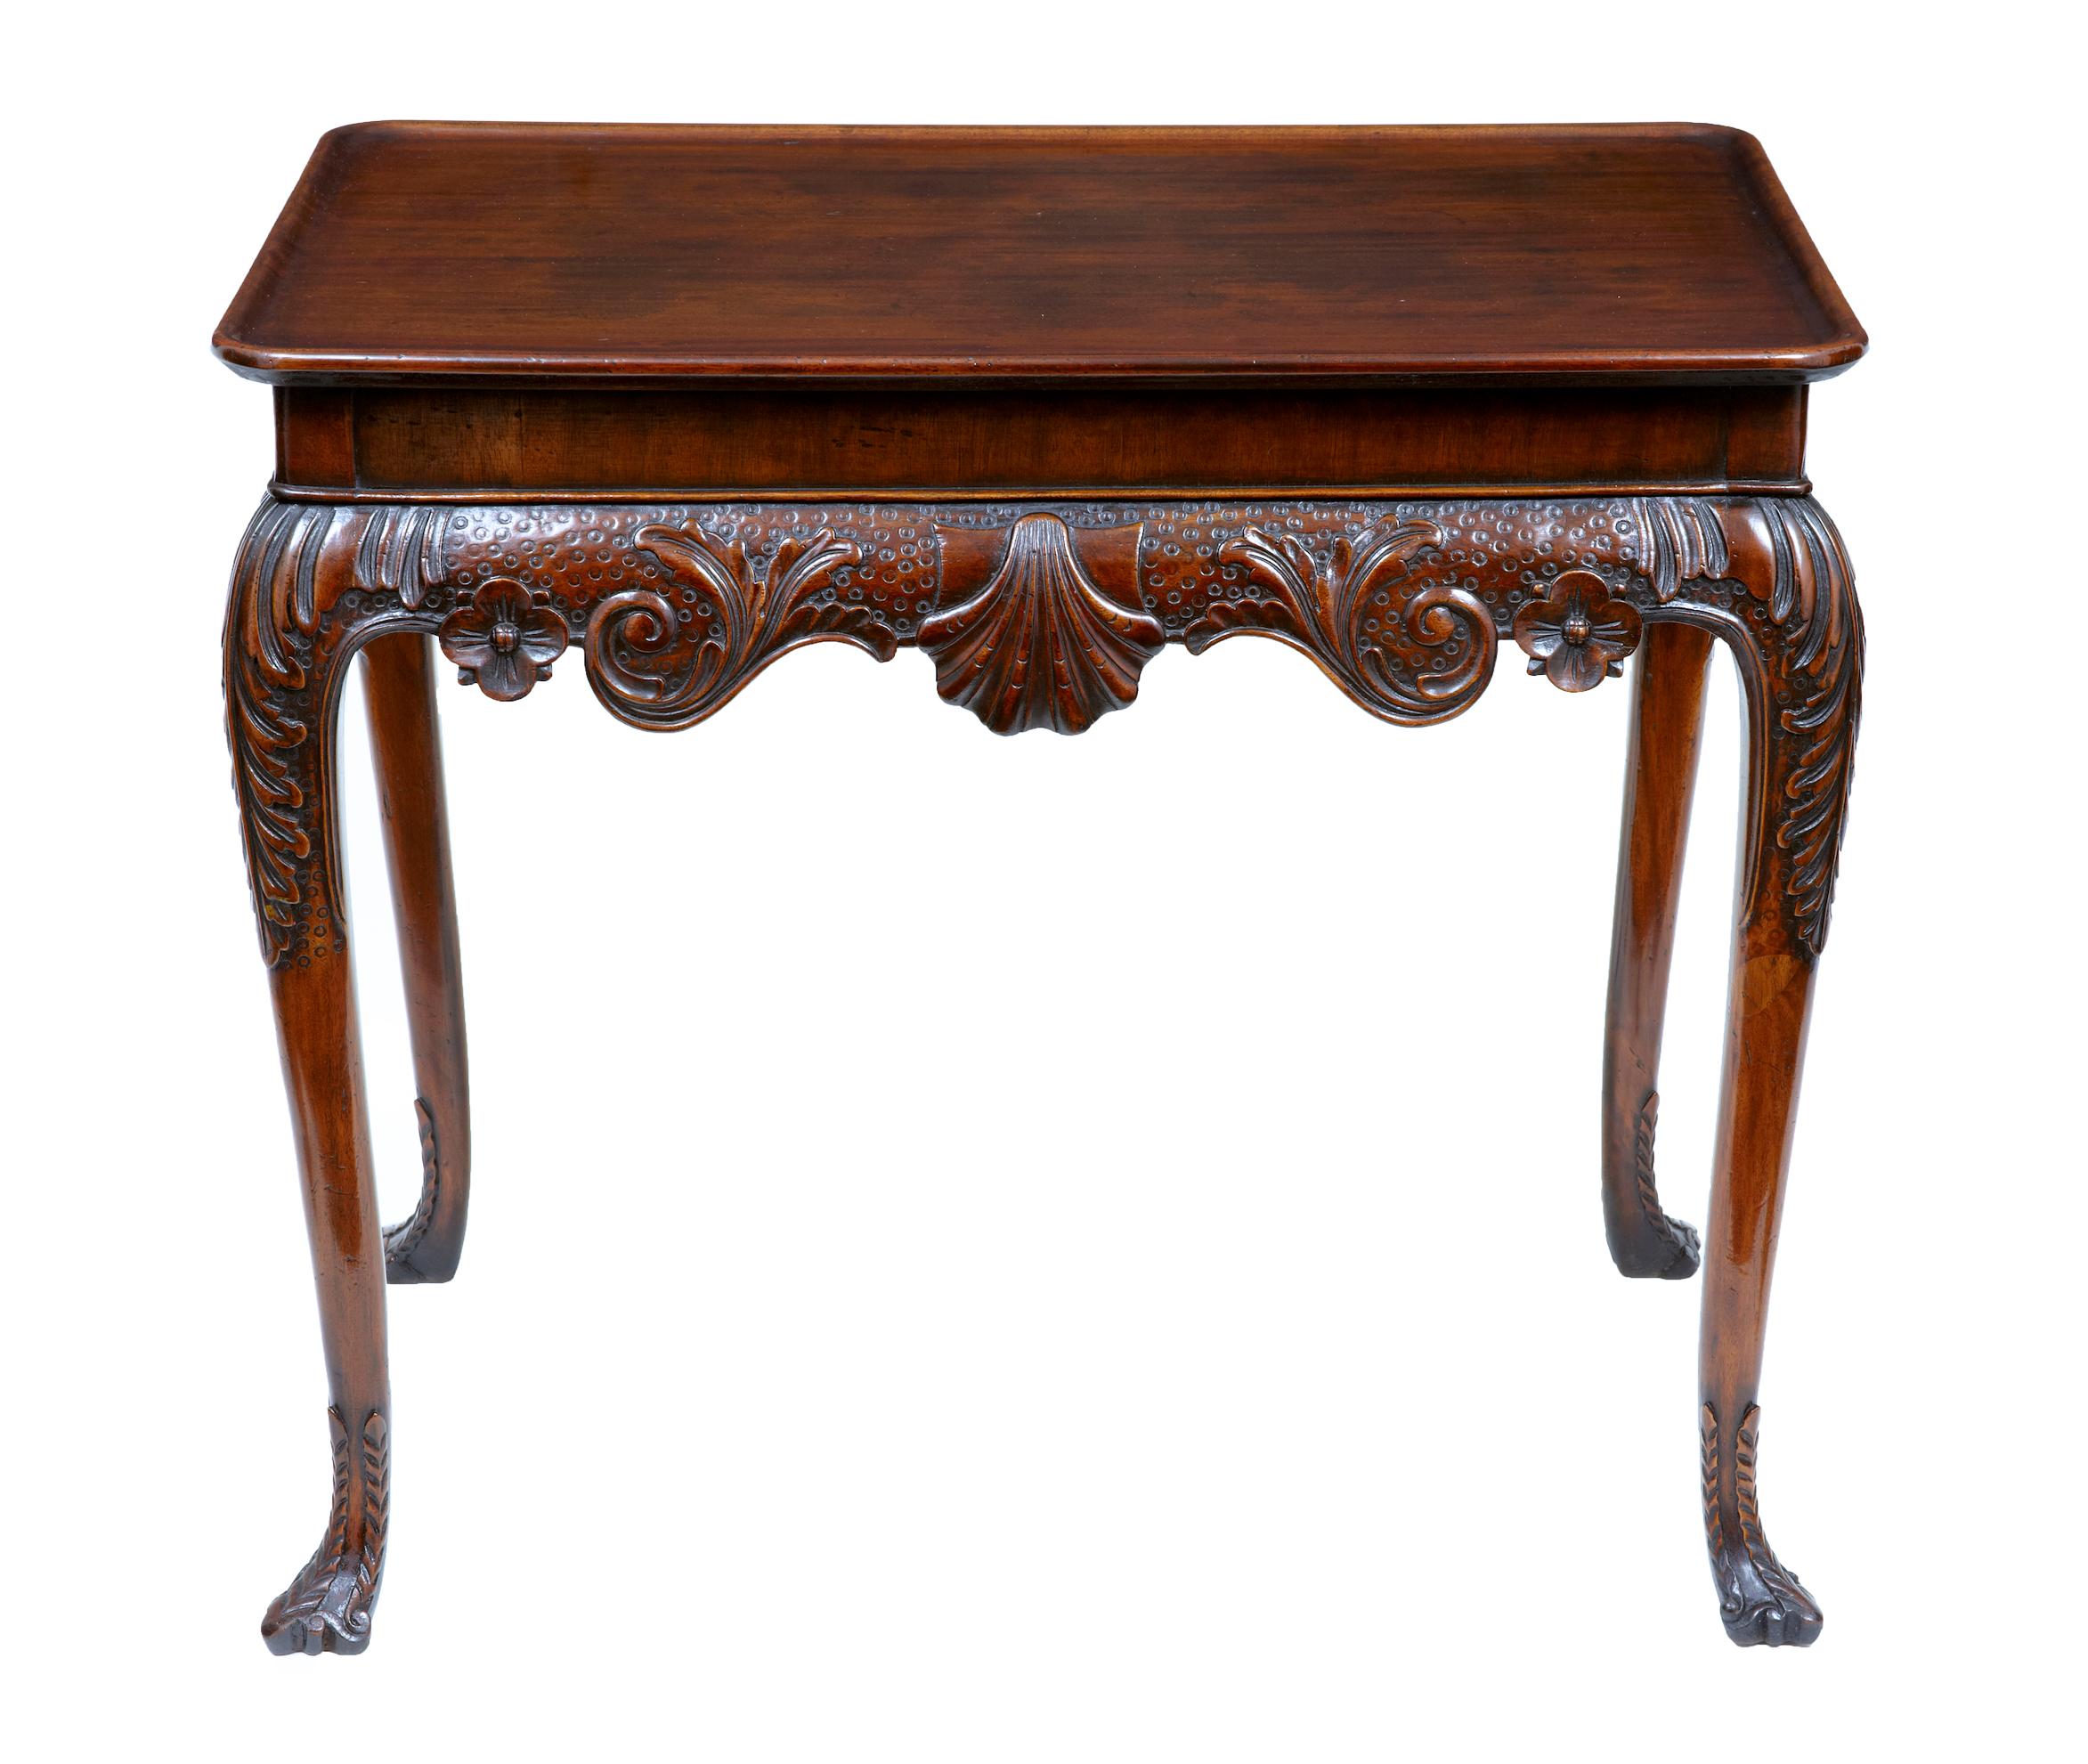 Early 20th century Edwardian mahogany silver table circa 1905

Rectangular dish top surface, with carved acanthus leaf detail to the knee and swags and shell to the apron. Standing on 4 cabriole legs and carved toe feet.

Good rich